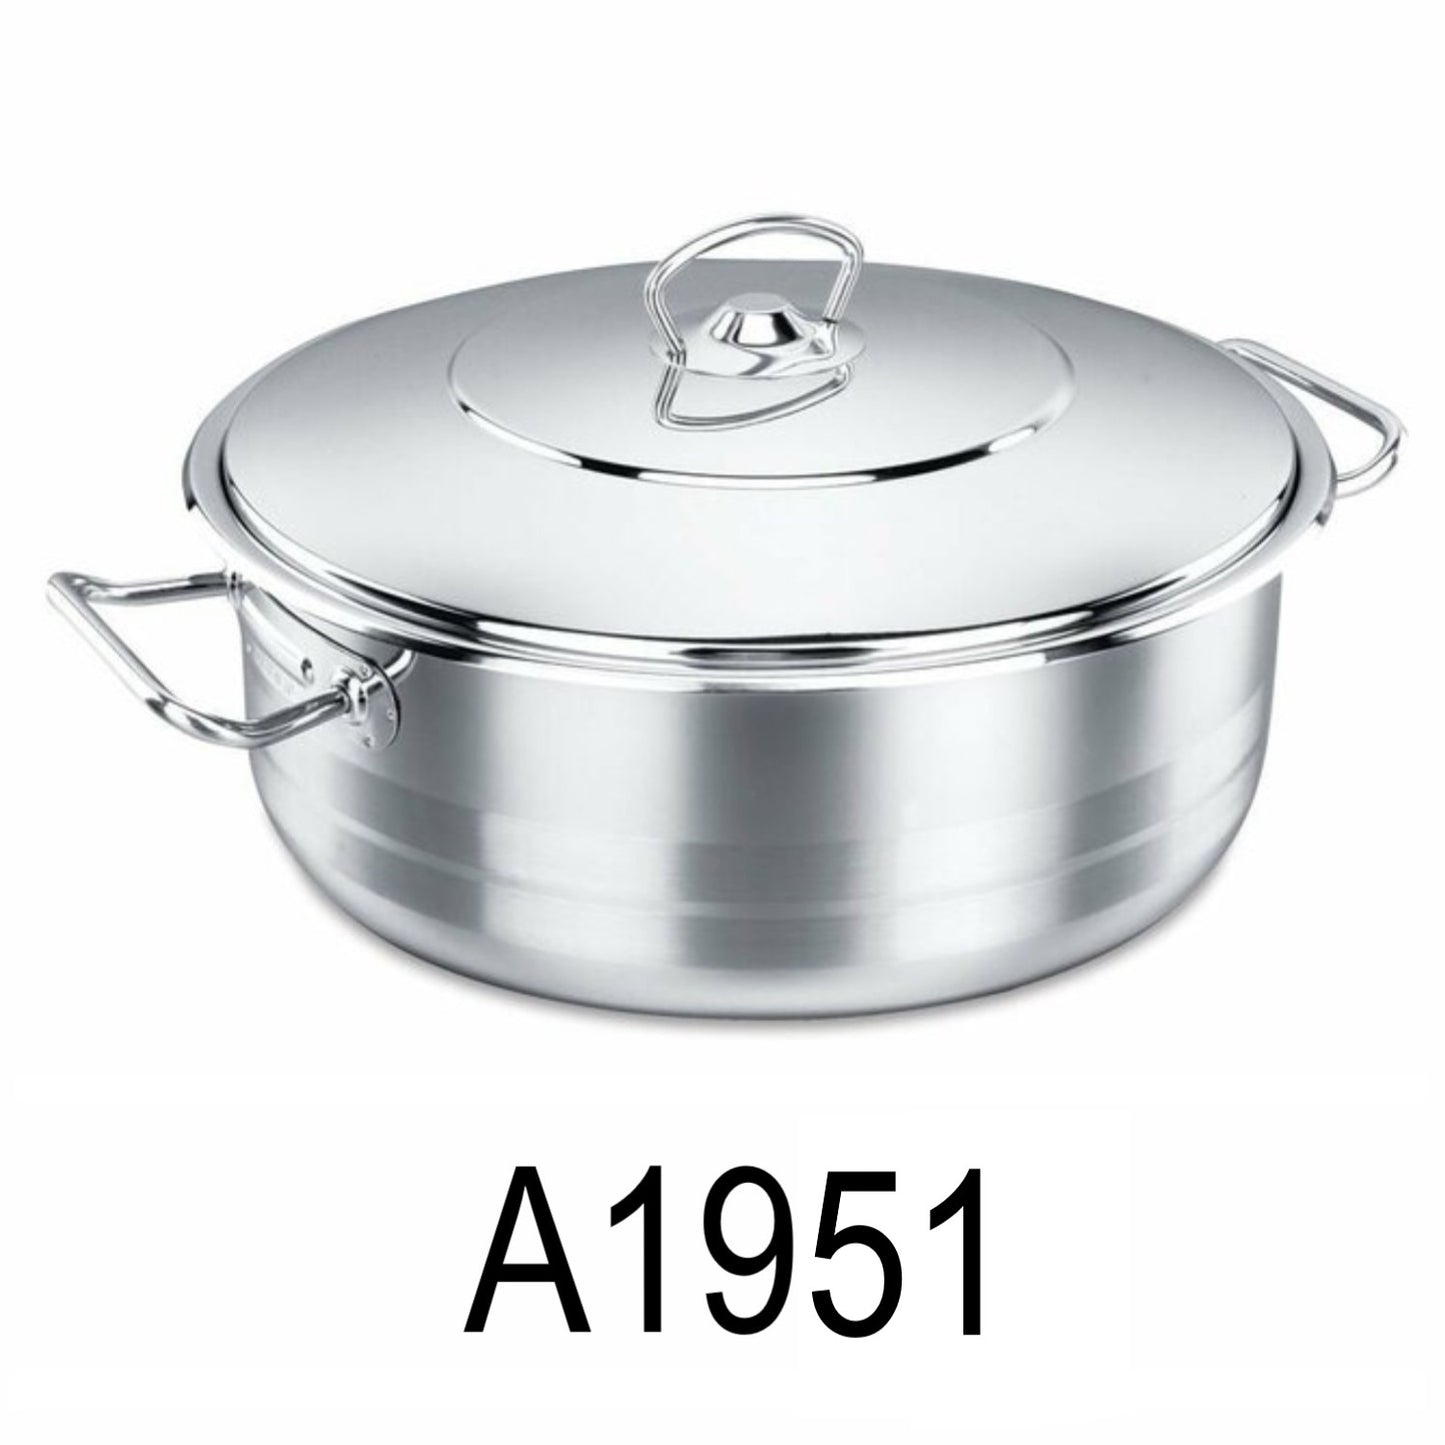 45L Stainless Steel Low Pot